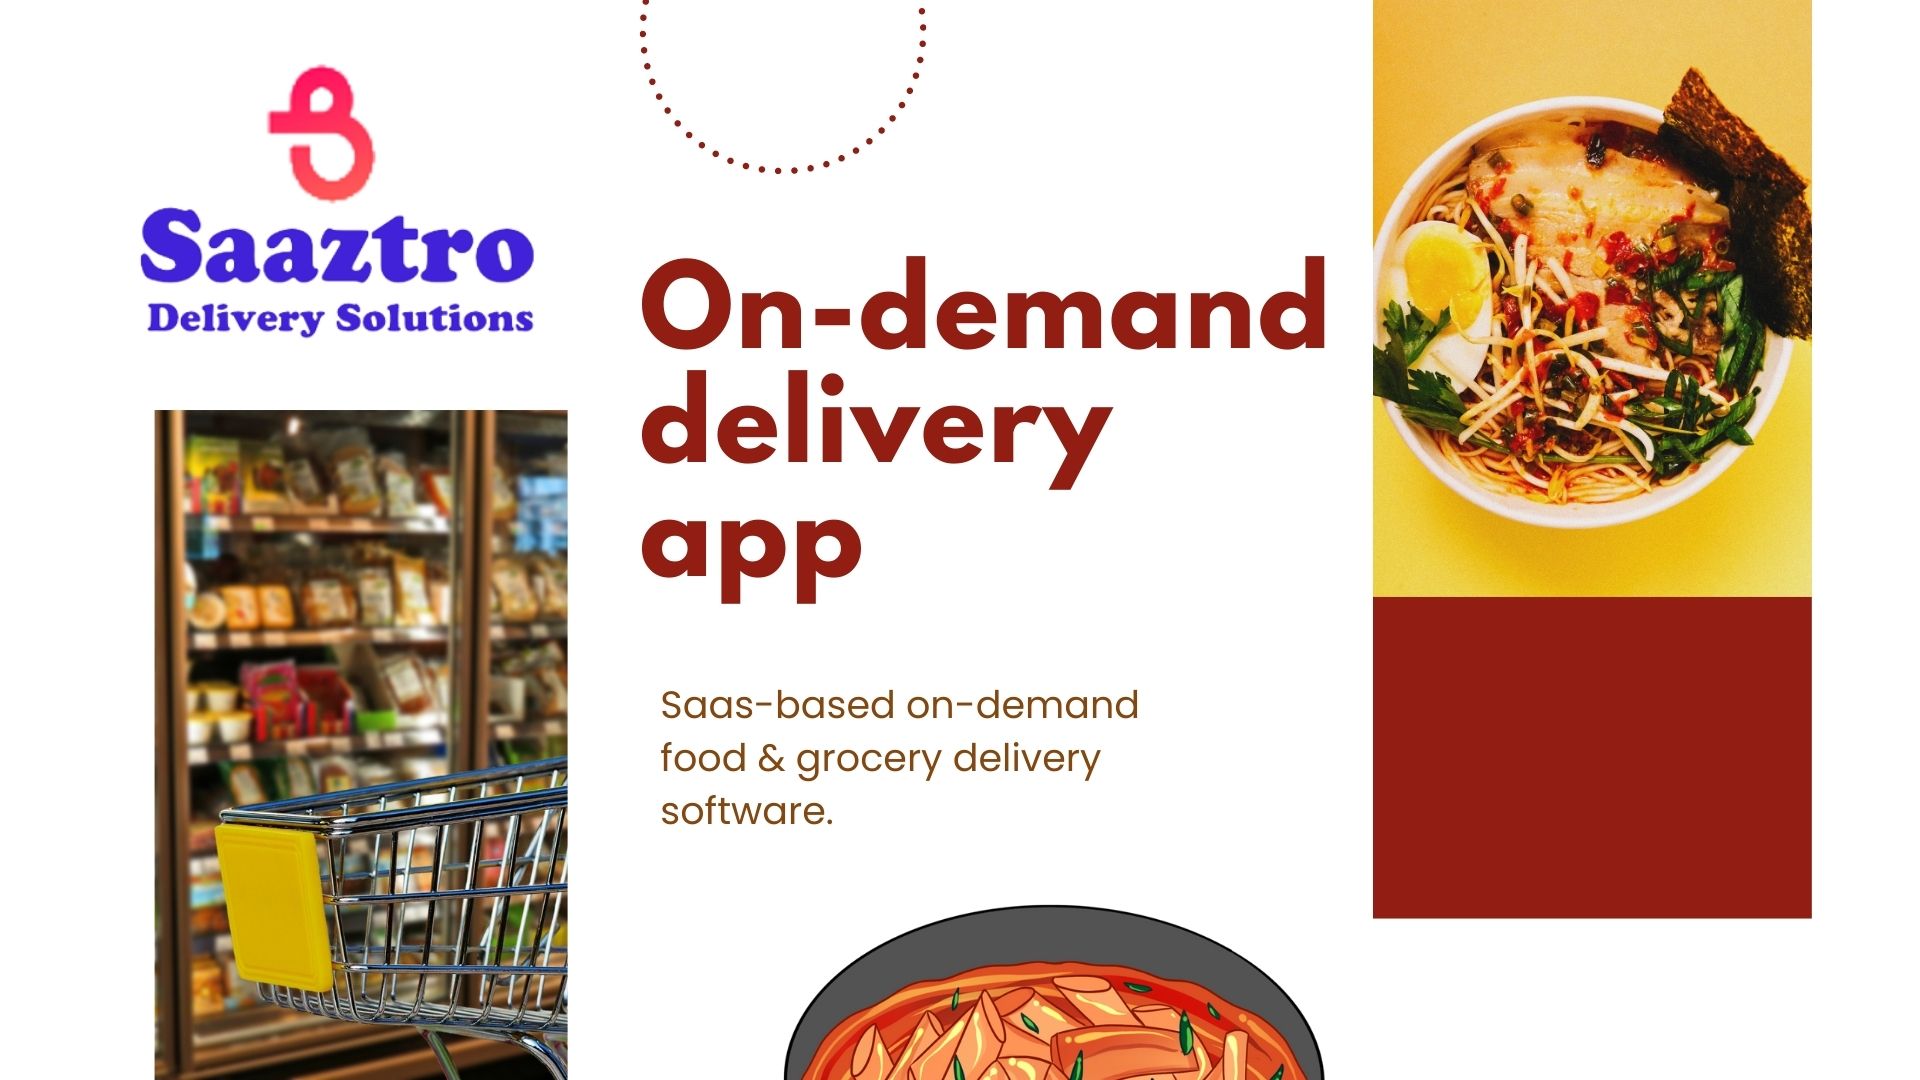 Saaztro

Delivery Solutions O n= d eman el
delivery
app

Saas-based on-demand
food & grocery delivery
software.

Ps.